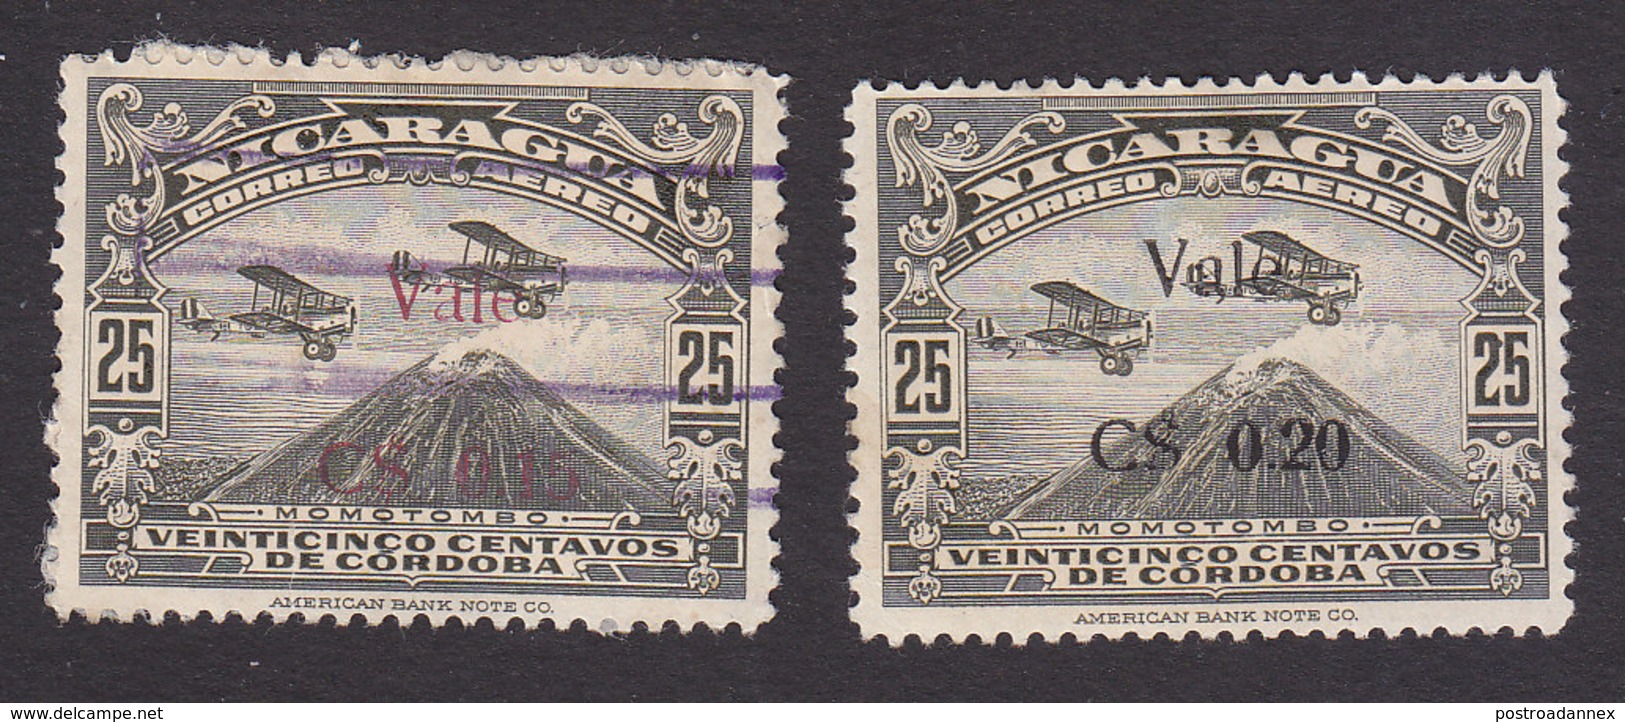 Nicaragua, Scott #C7-C8, Used/Mint Hinged, Airplane Over Mt Momotombo Surcharged, Issued 1930 - Nicaragua